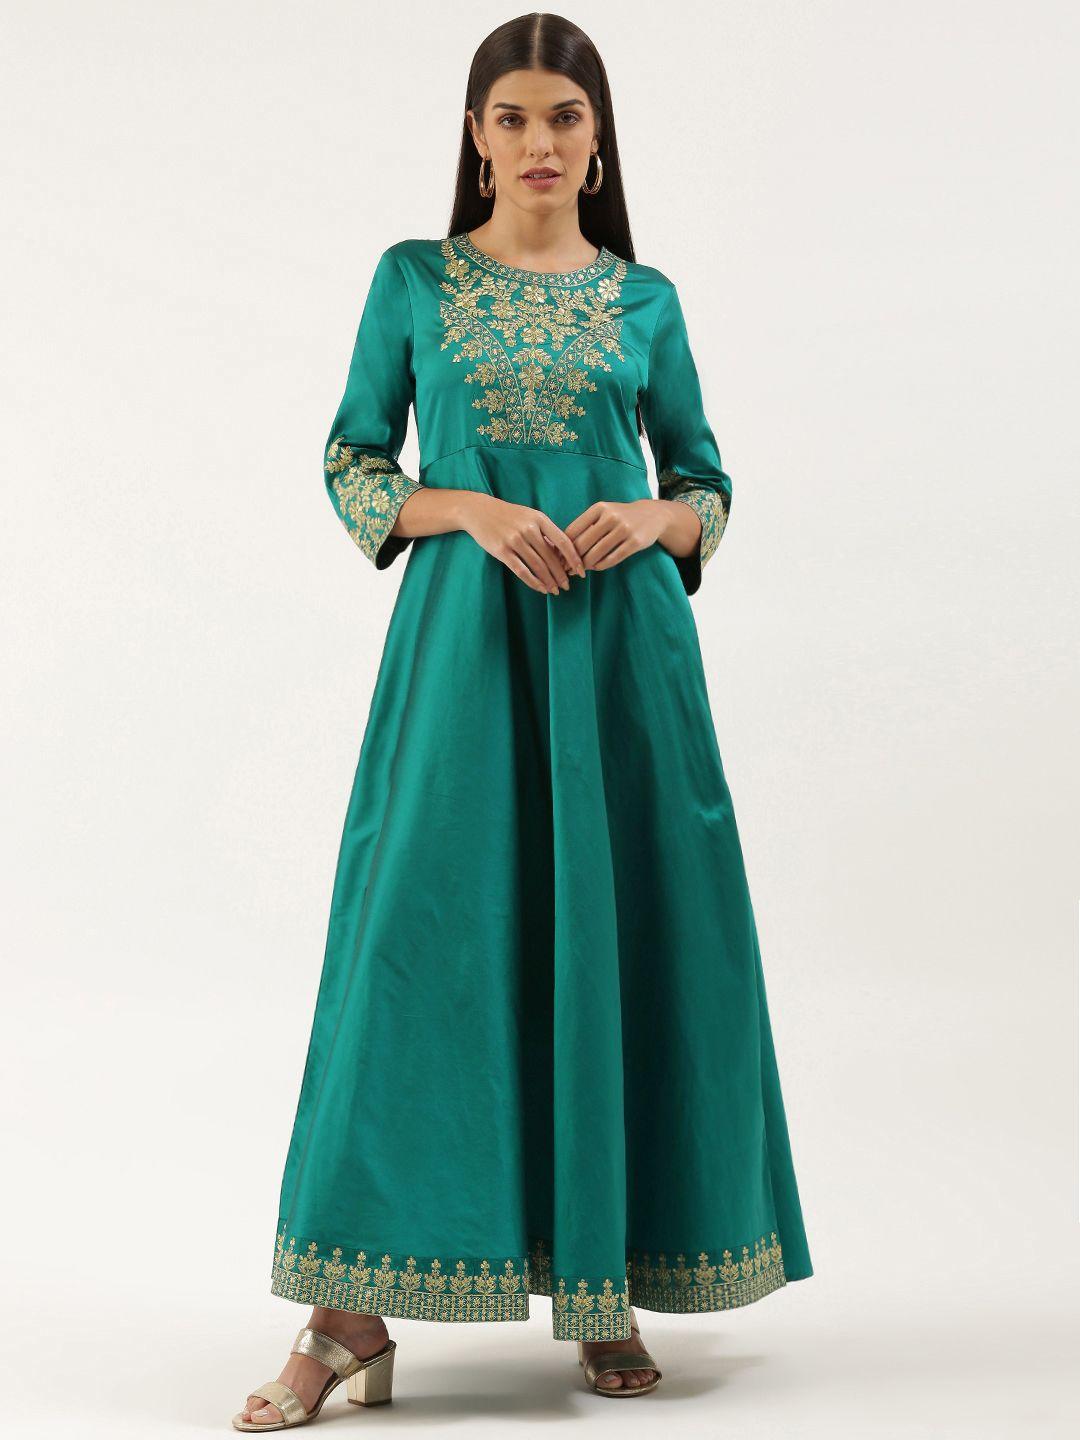 swagg india teal blue & golden embroidered ethnic gown